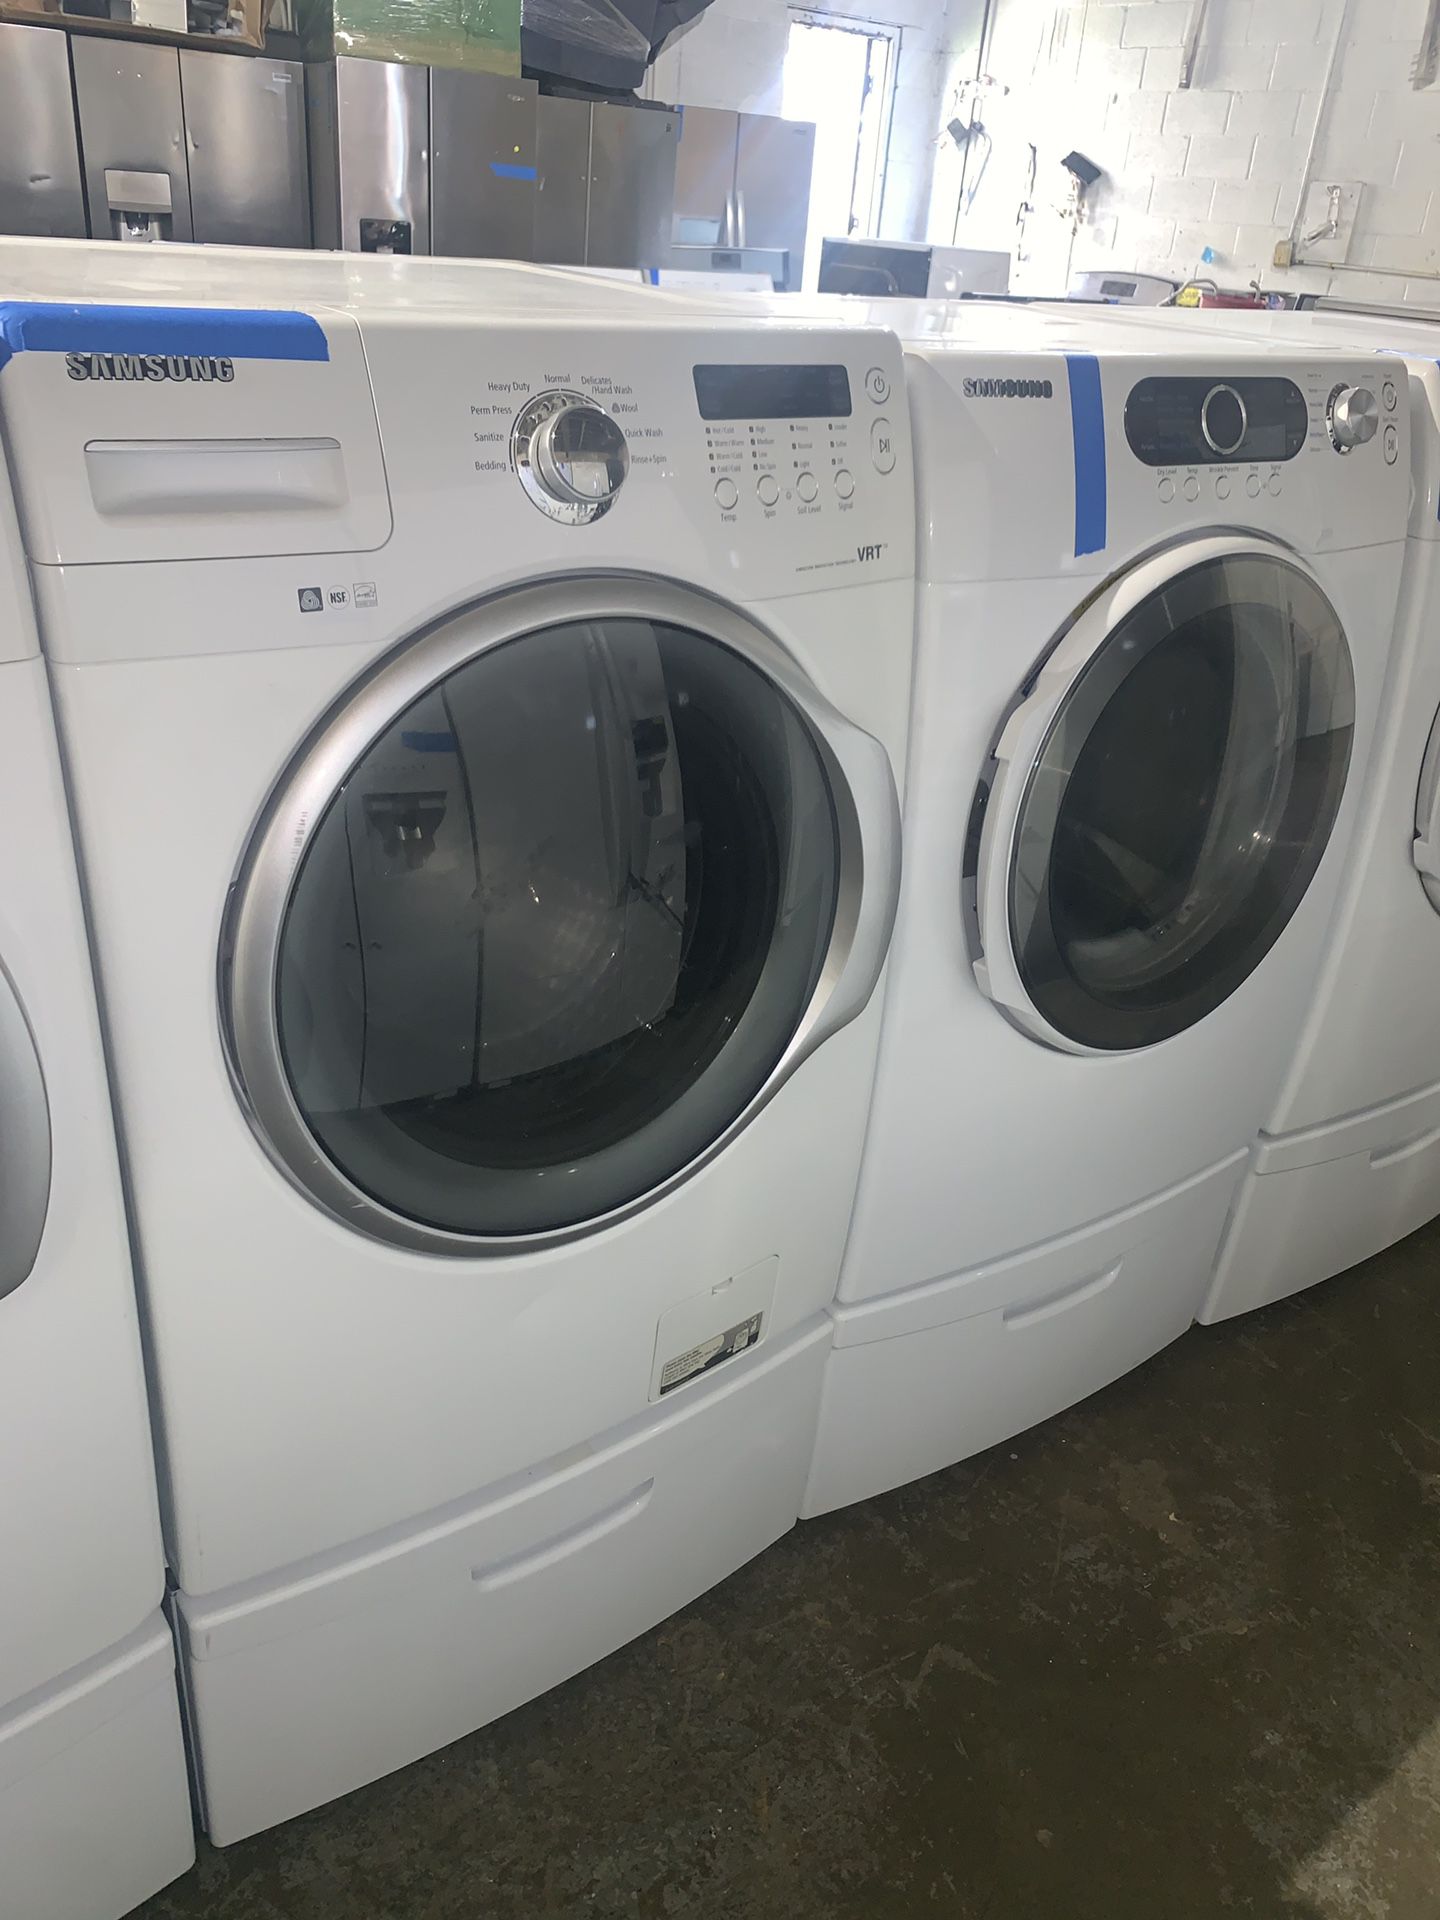 Samsung front load washer & electric dryer with pedestals in excellent conditions with 4 months warranty